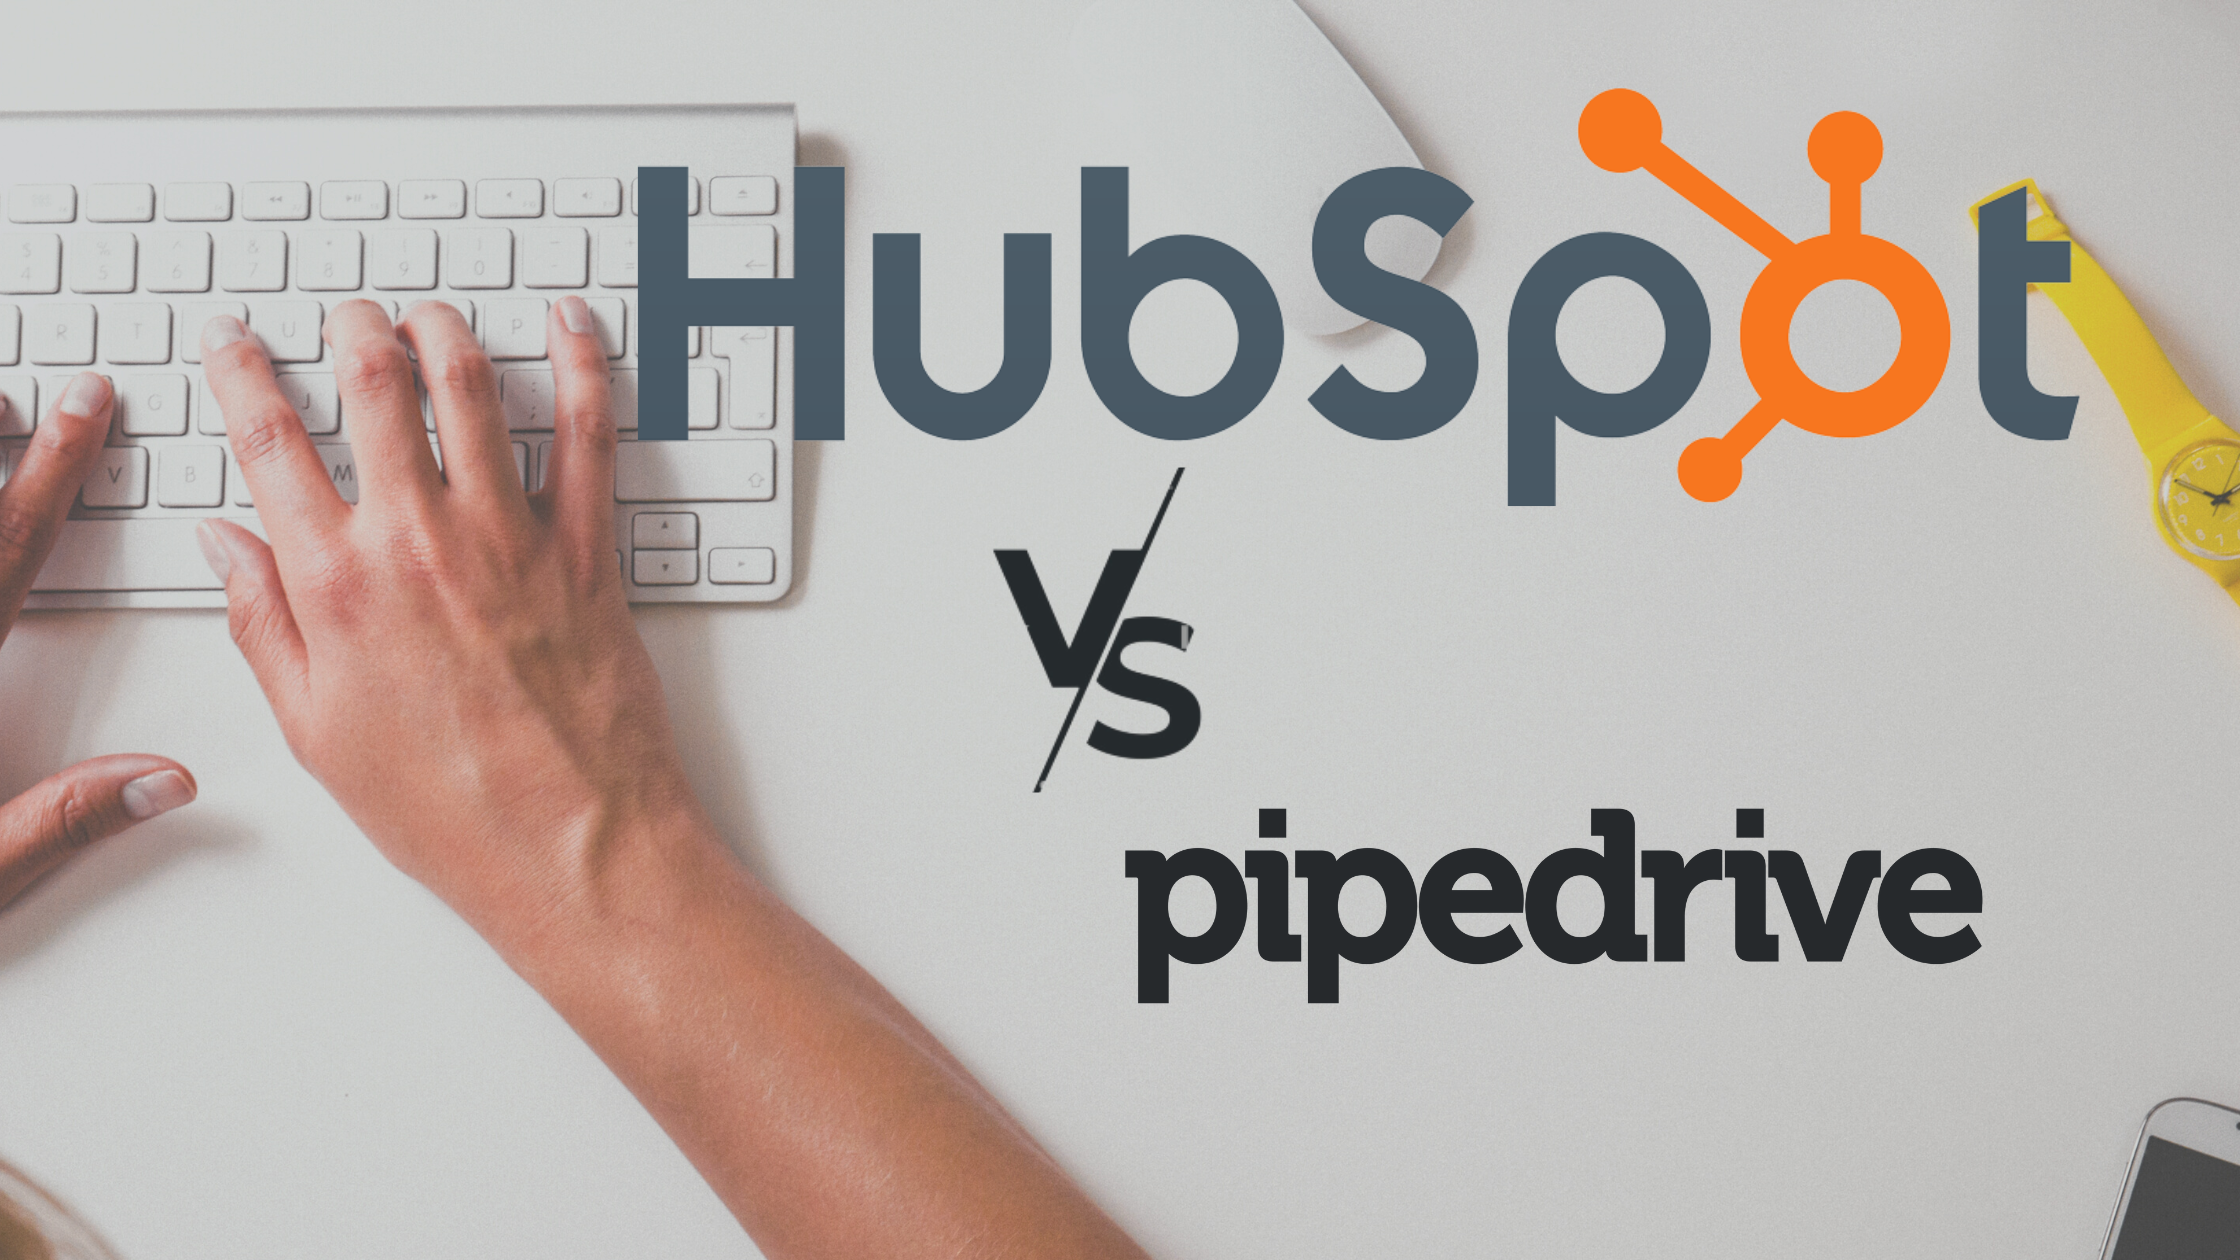 Pipedrive Vs HubSpot: Which CRM Platform is Better?